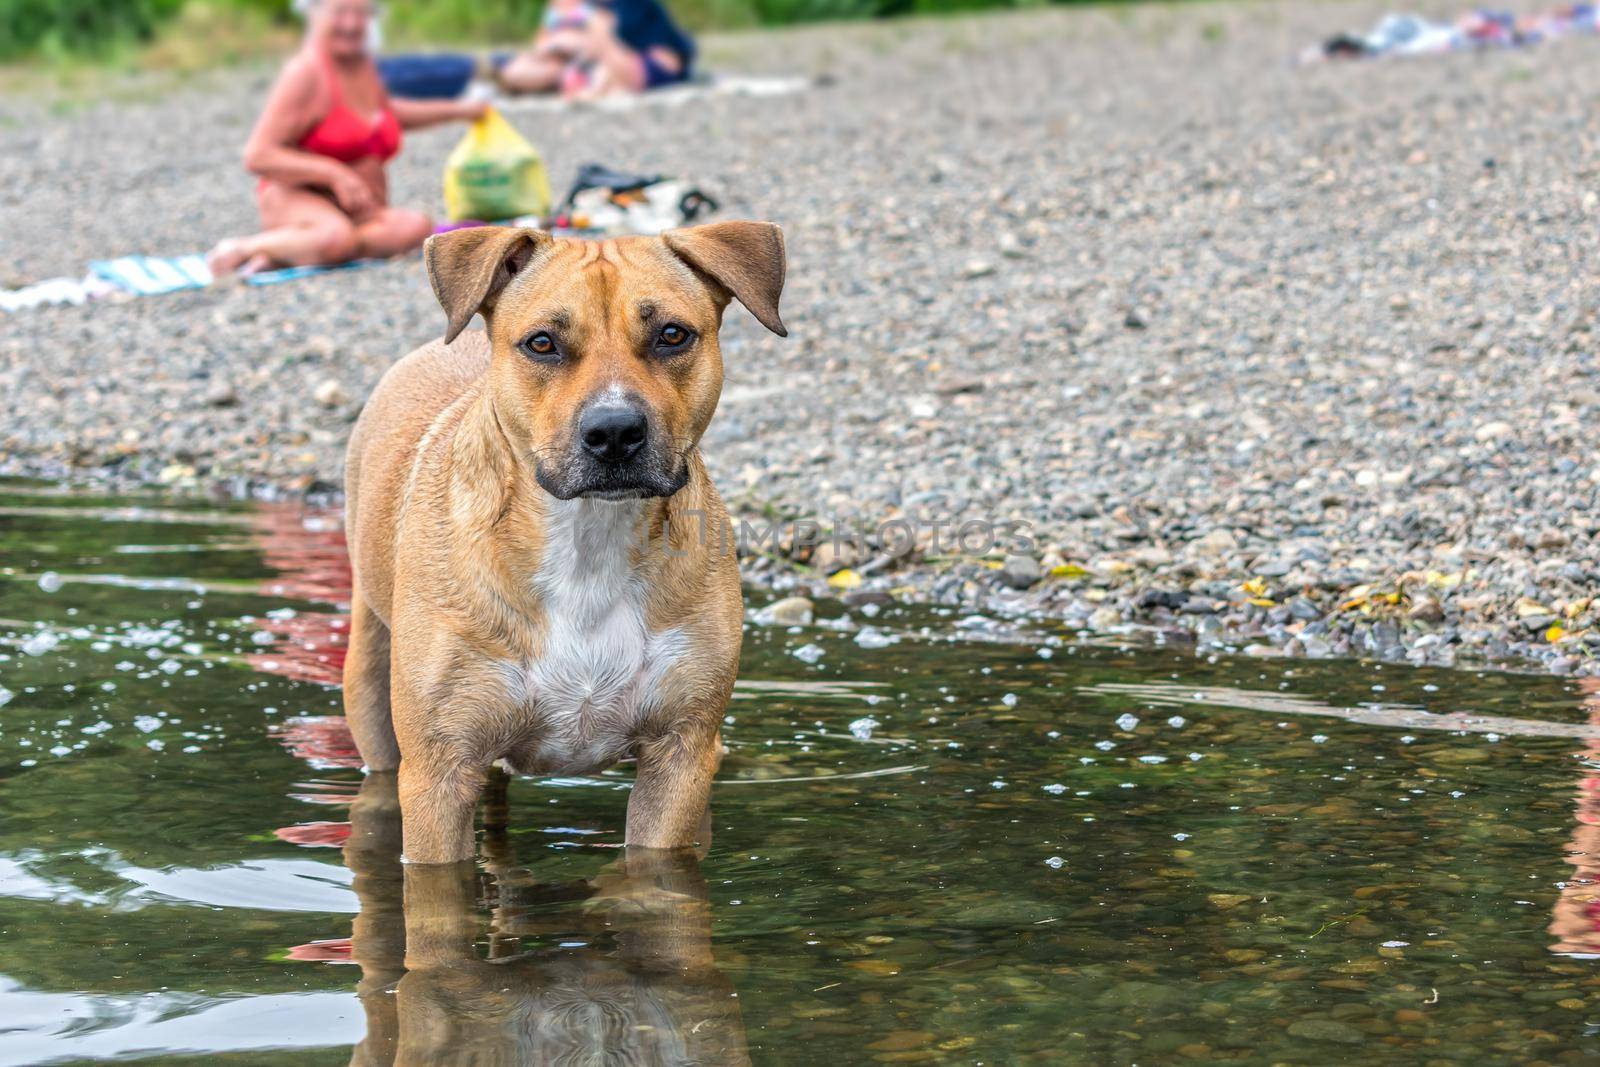 A pitbull dog with a sad look stands in the water of a lake near the beach